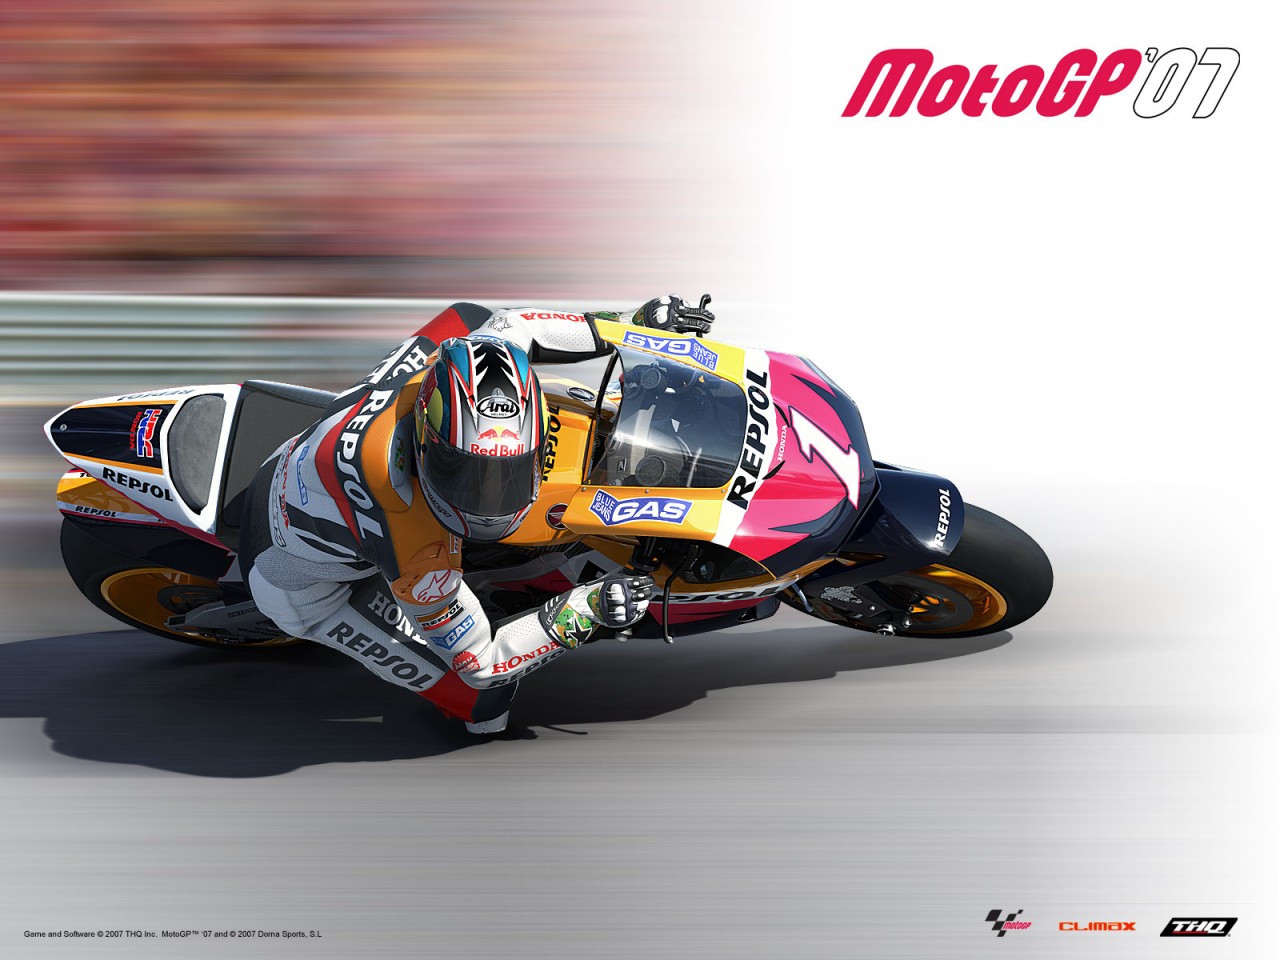 Motogp Cell Phone Wallpapers